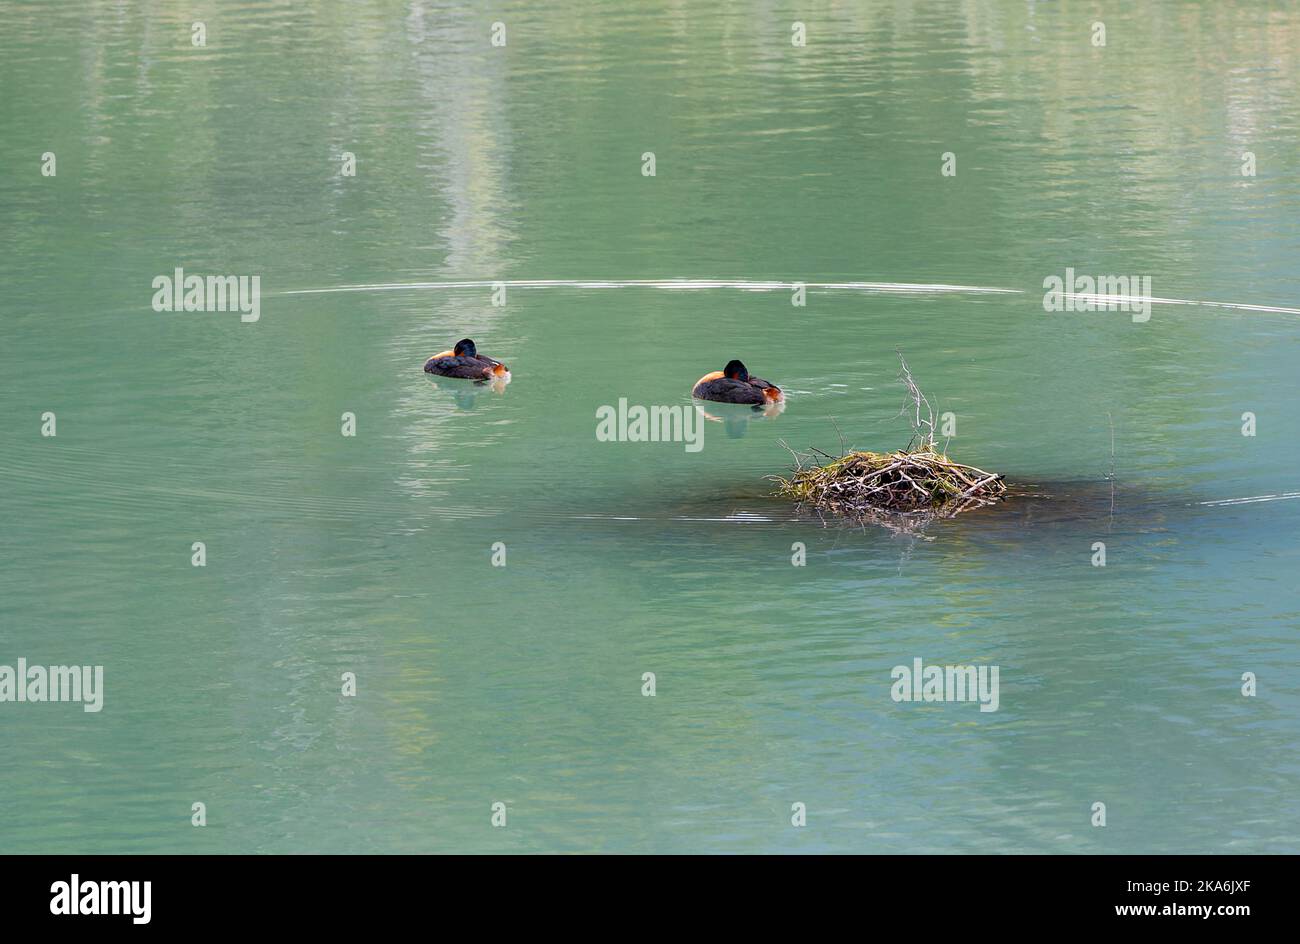 Great grebe (Podiceps major). Pair of grebes swimming near their nest in southern Argentina. Stock Photo